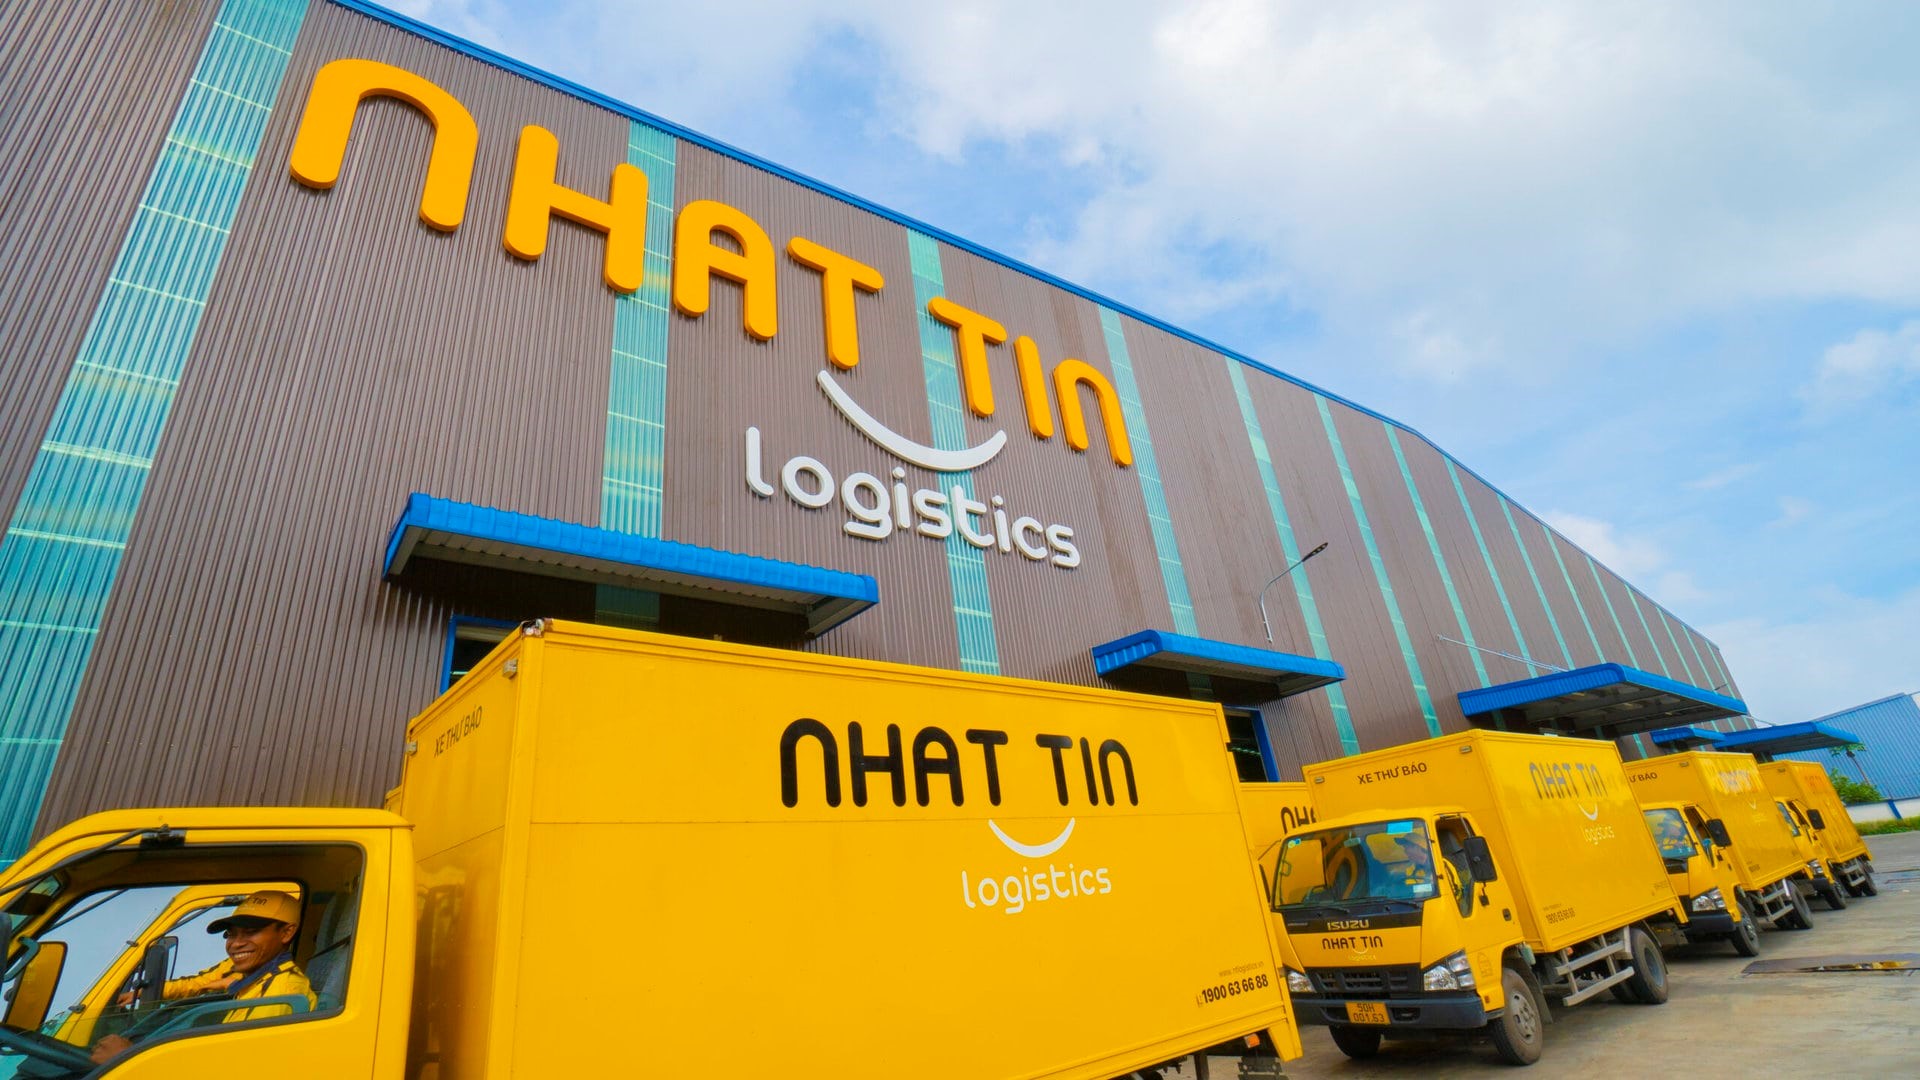 Nhat Tin Logistics JSC is facing a loss of more than 25 billion dongs.